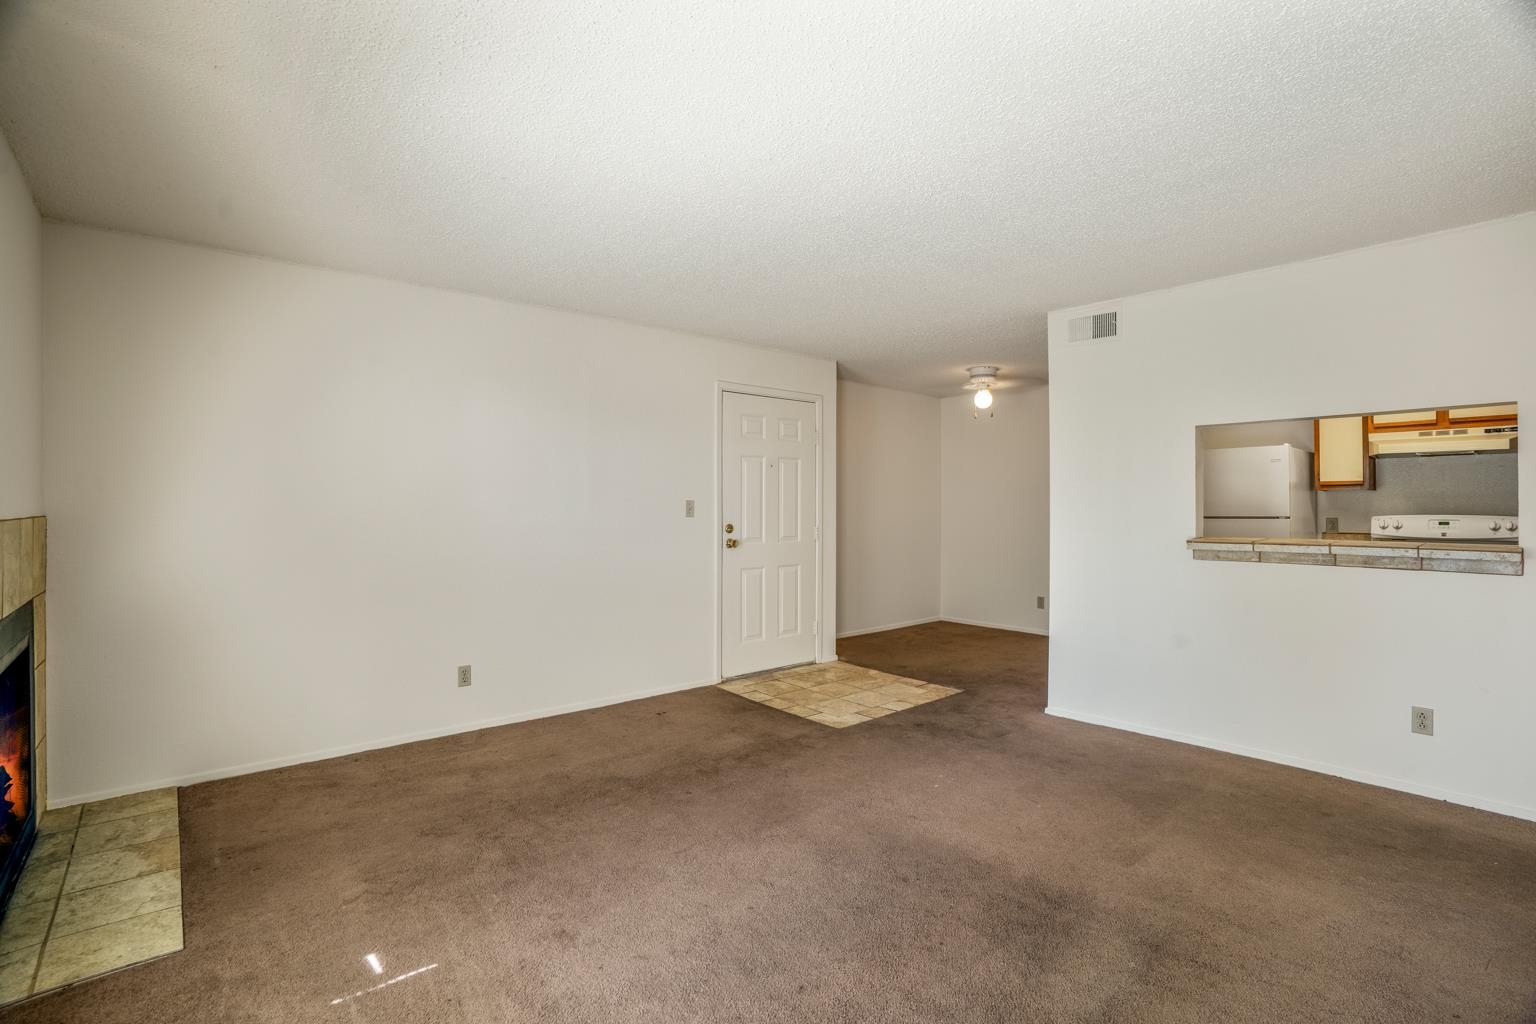 2501 W Zia Rd UNIT 10-208, Santa Fe, New Mexico 87505, 1 Bedroom Bedrooms, ,1 BathroomBathrooms,Residential,For Sale,2501 W Zia Rd UNIT 10-208,202202131